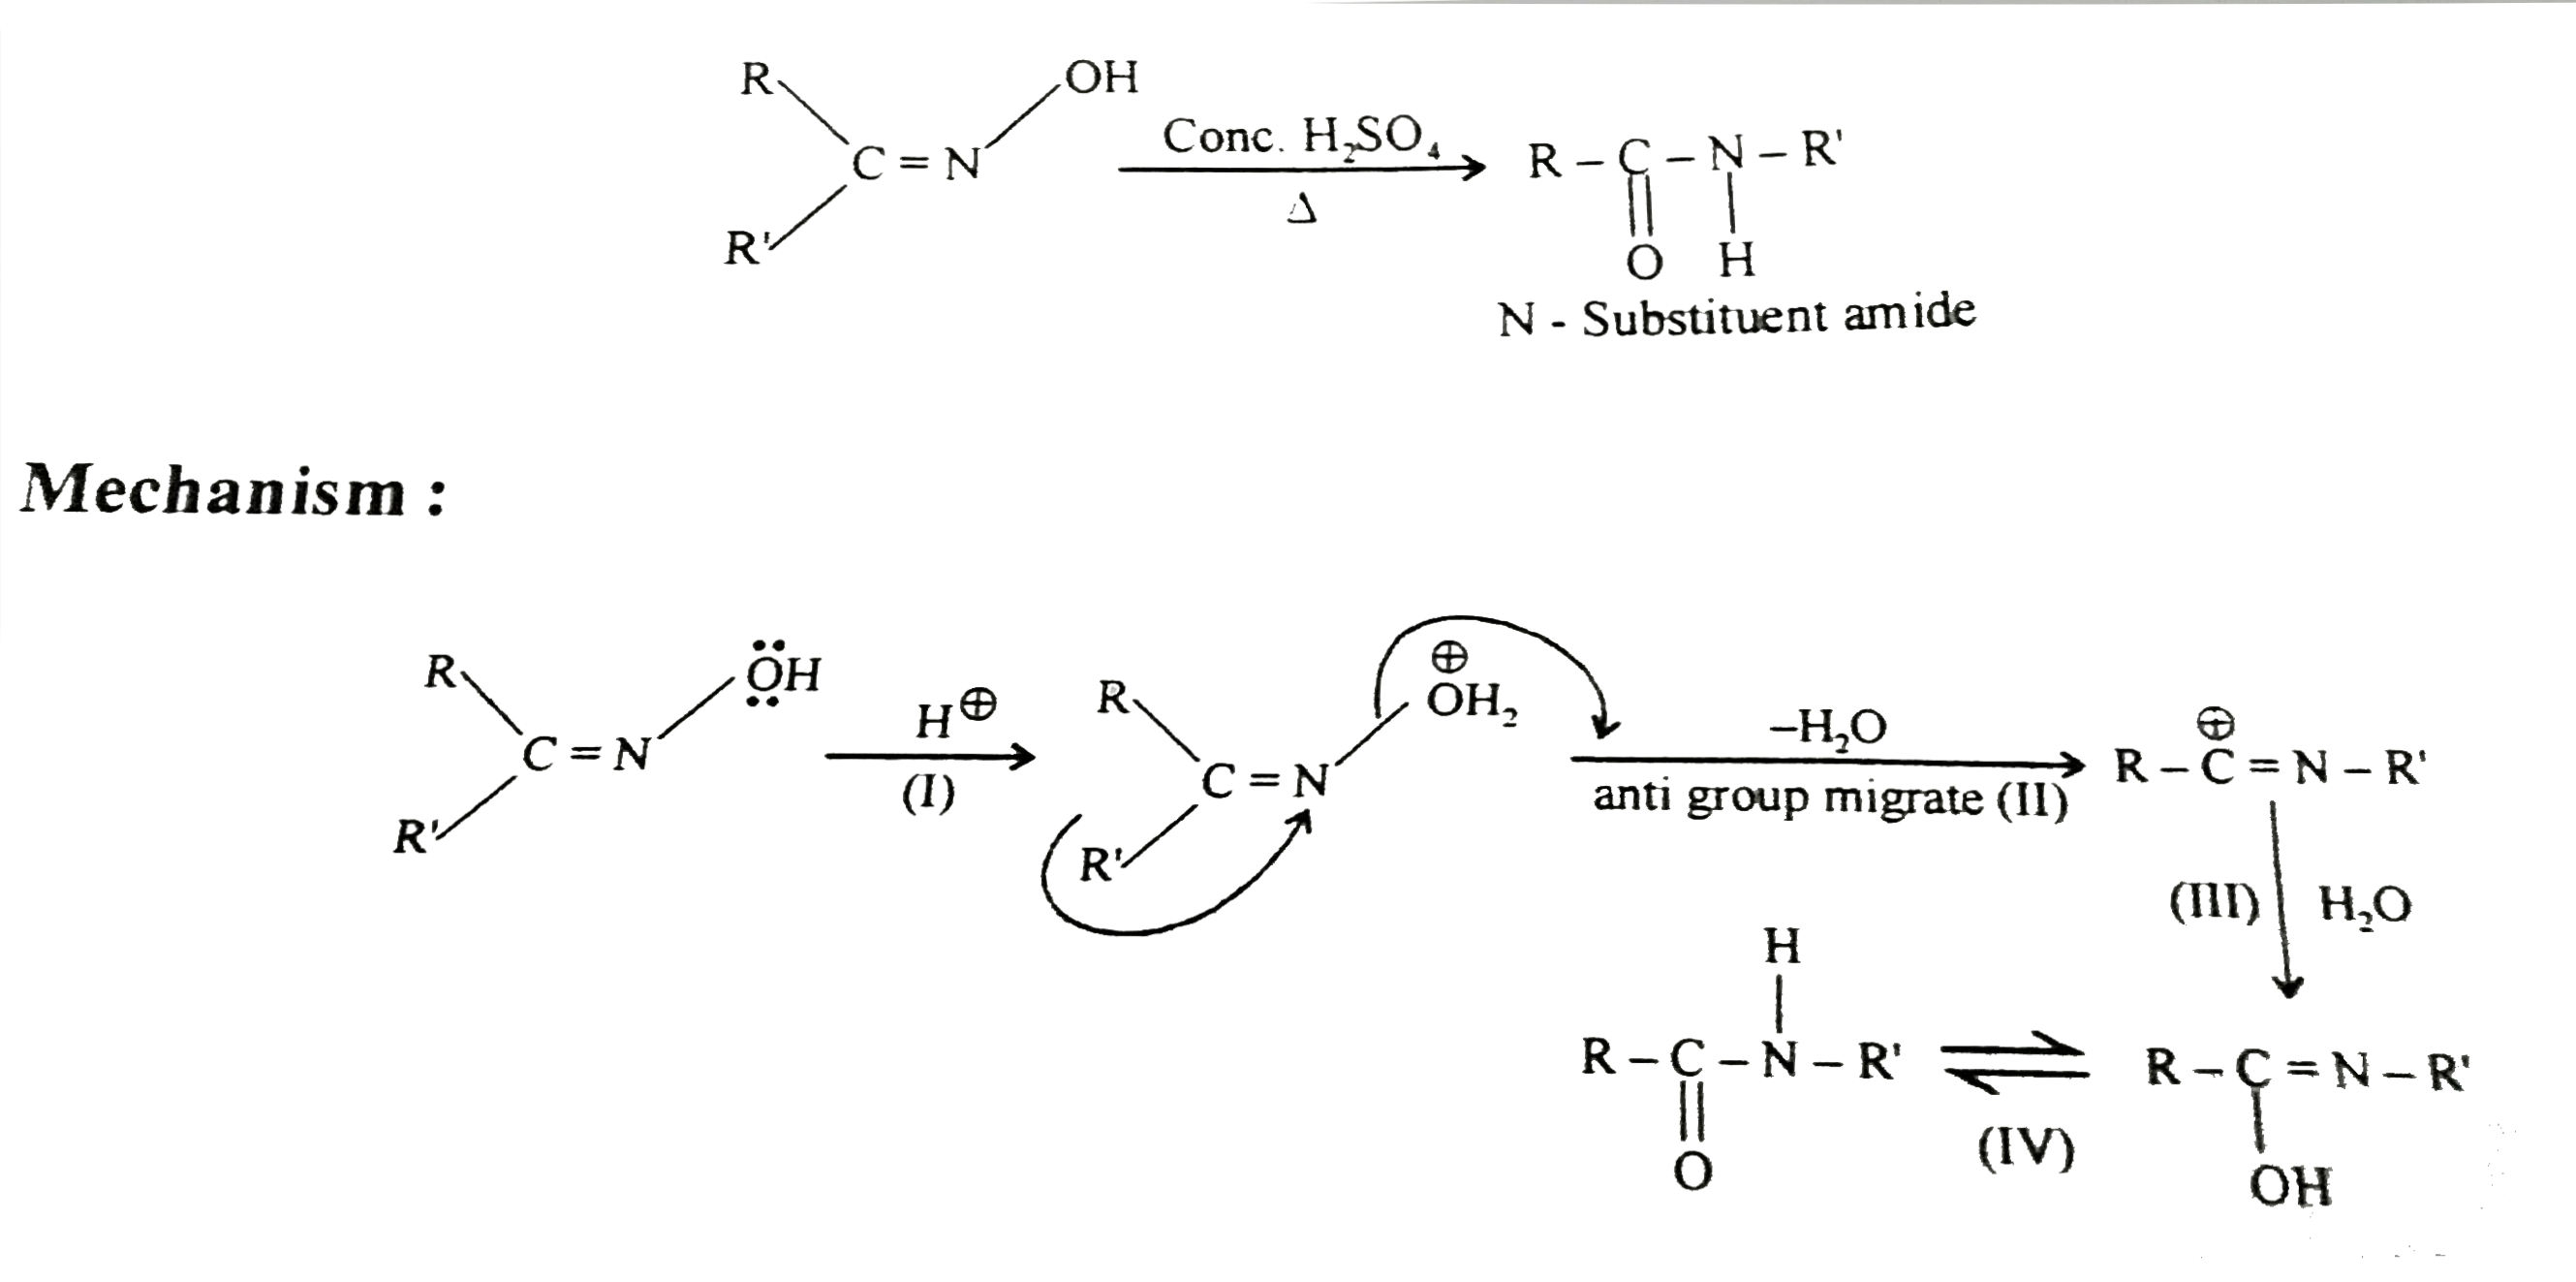 Ketoxine when heated with certain reagents undergoes rearrangement to form amides. This  is known as Beckmann's rearrangement.            Find out (X) of the reaction: